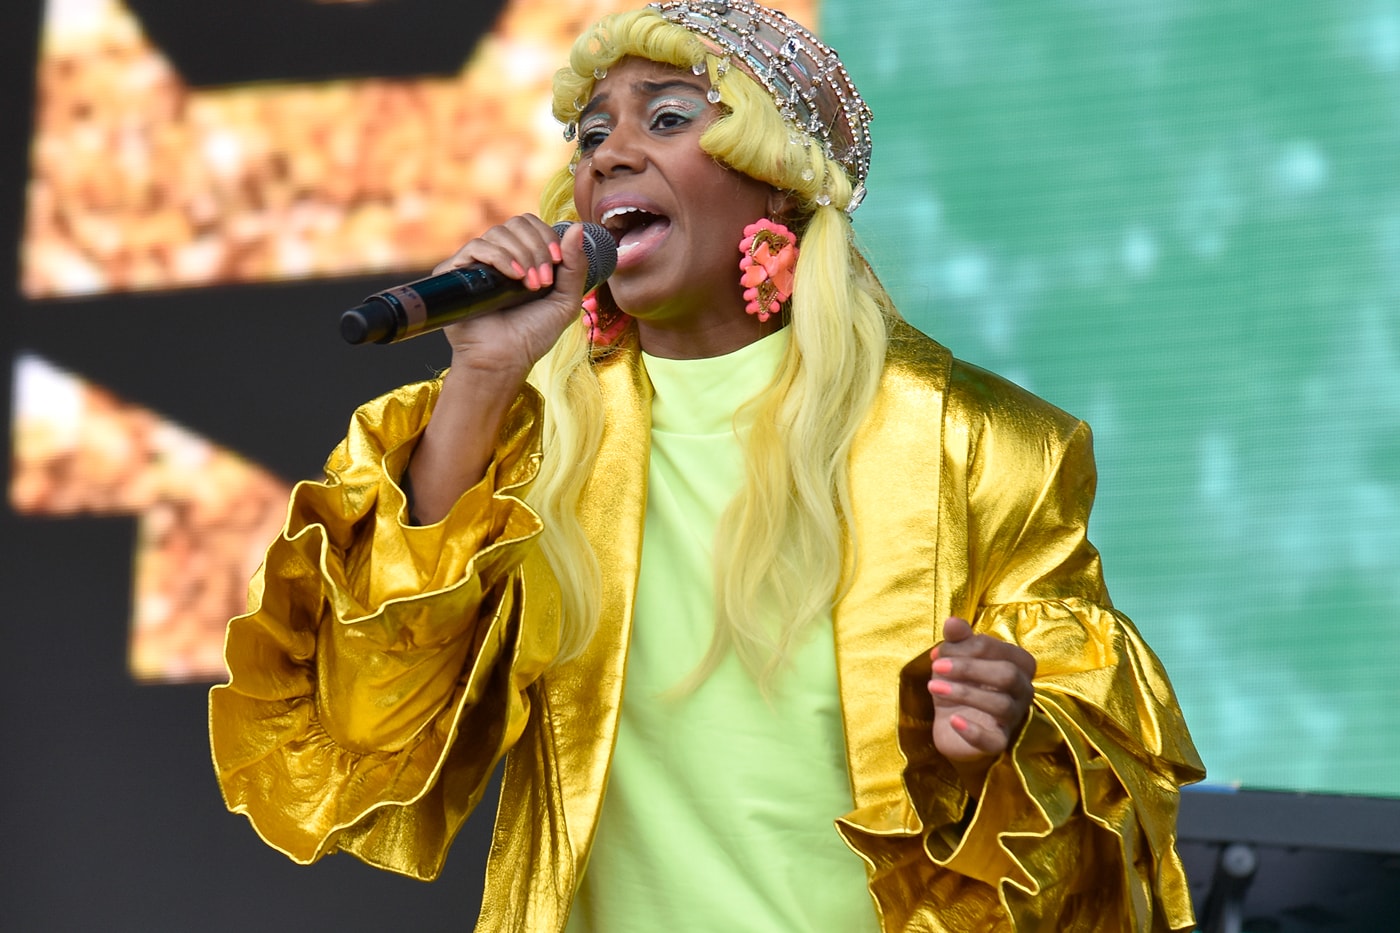 santigold-returns-in-a-big-way-with-chasing-shadows-video